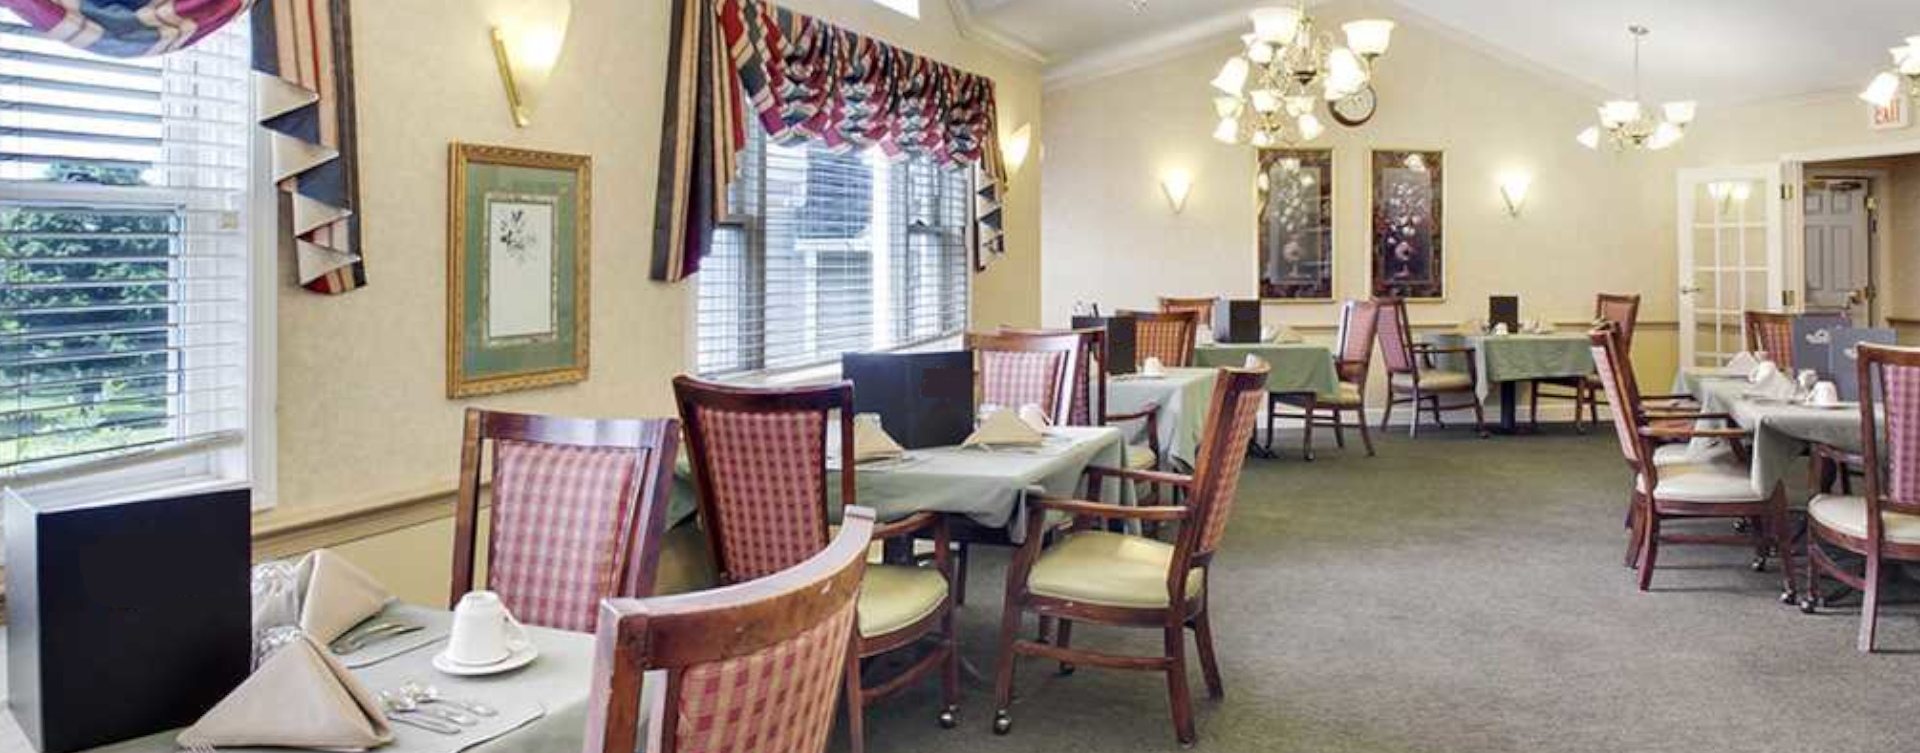 Food is best when shared with friends in the dining room at Bickford of Scioto